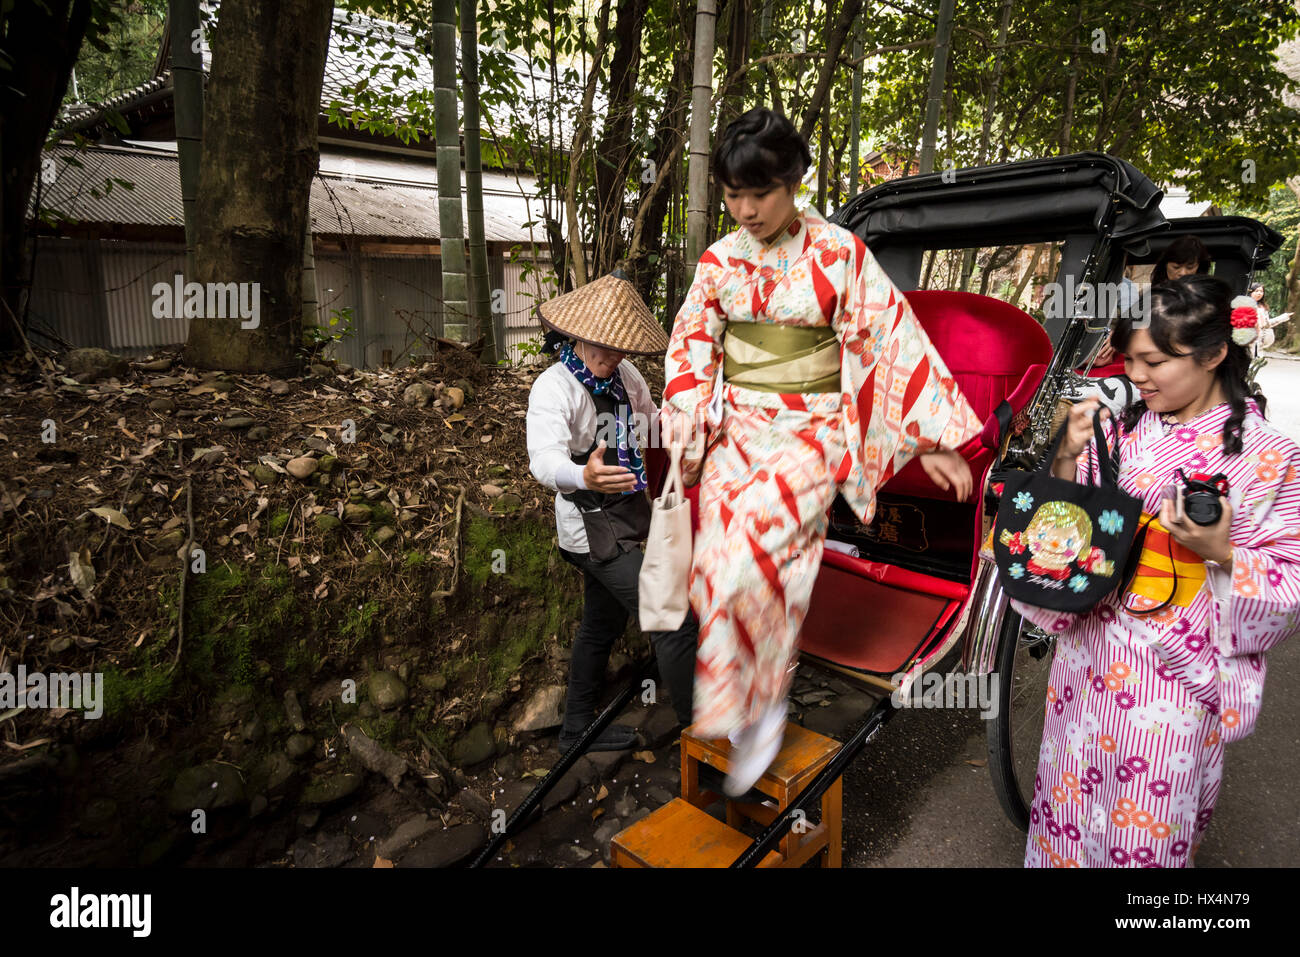 A rickshaw pulled by a male in traditional worker's uniform and two female passengers in Kimono, Japanese traditional costume, Kyoto, Japan Stock Photo